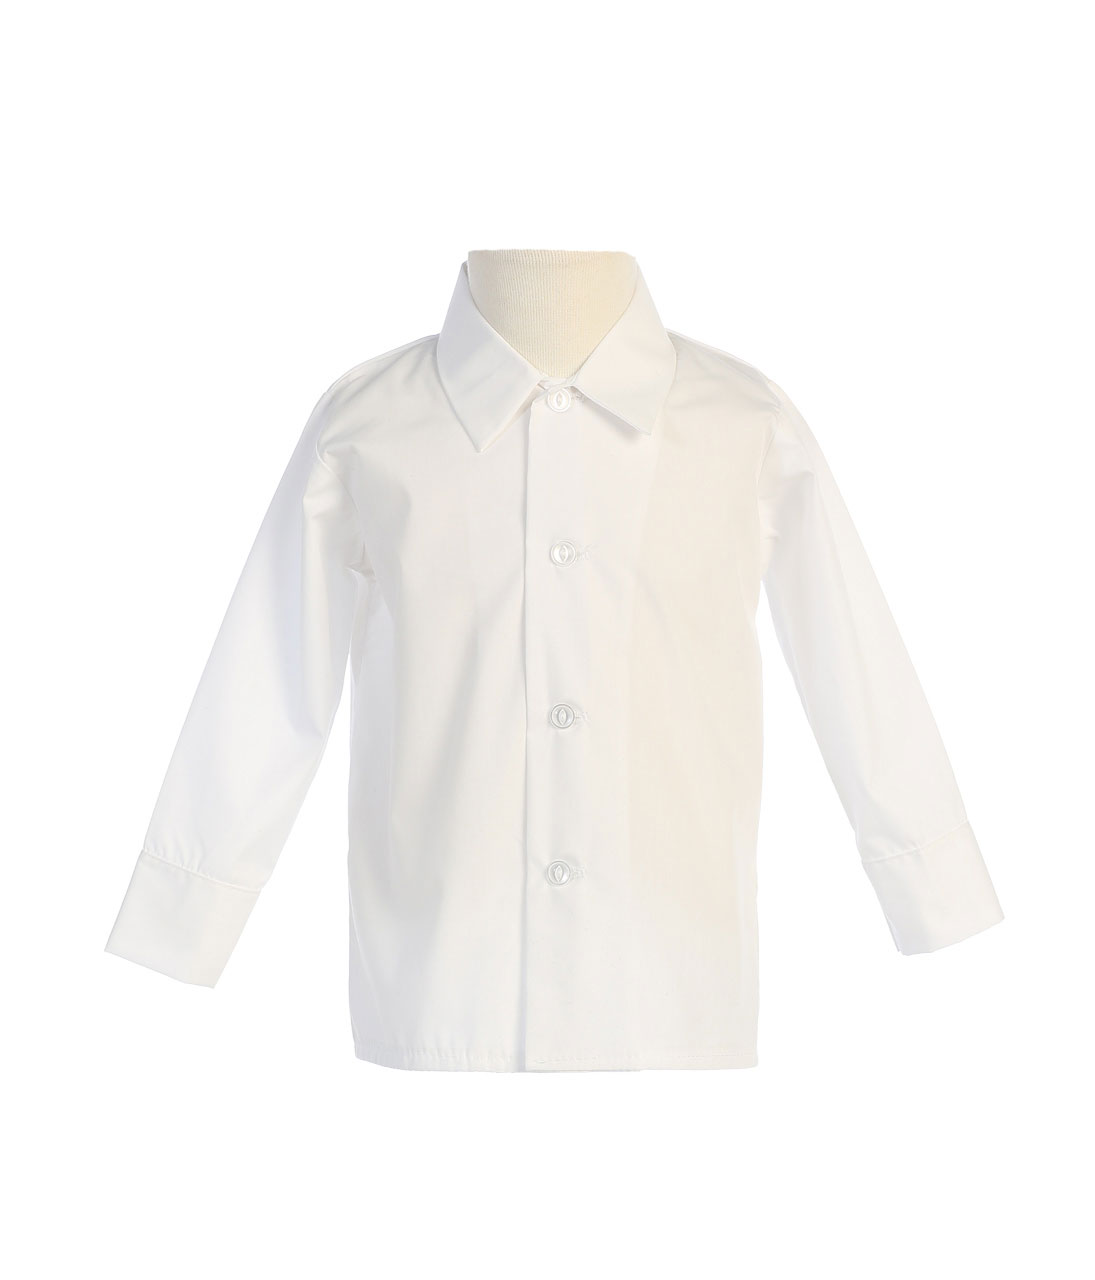 Boys Long Sleeved Simple Dress Shirt - Available in White S